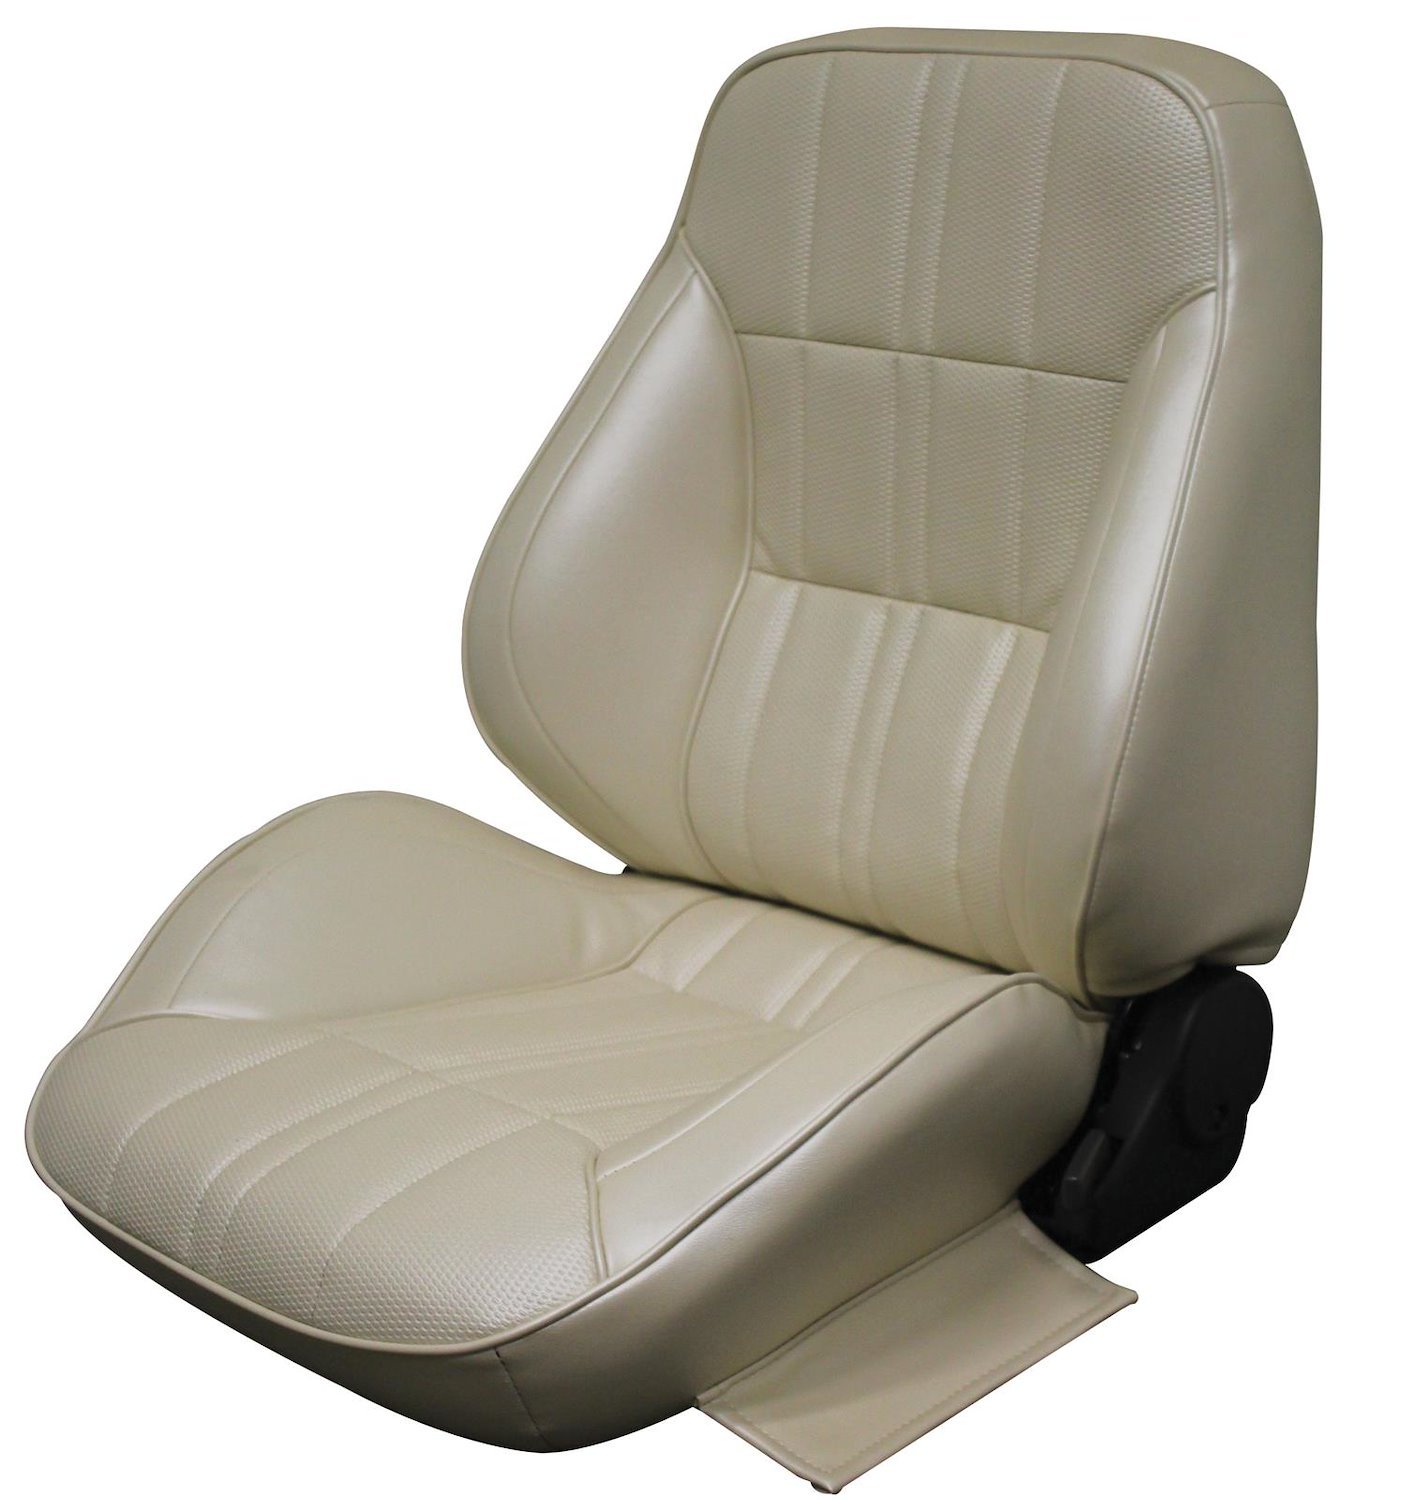 1971-1973 Ford Mustang Deluxe and Grande Interior White  Touring II Preassembled Reclining Front Bucket Seats